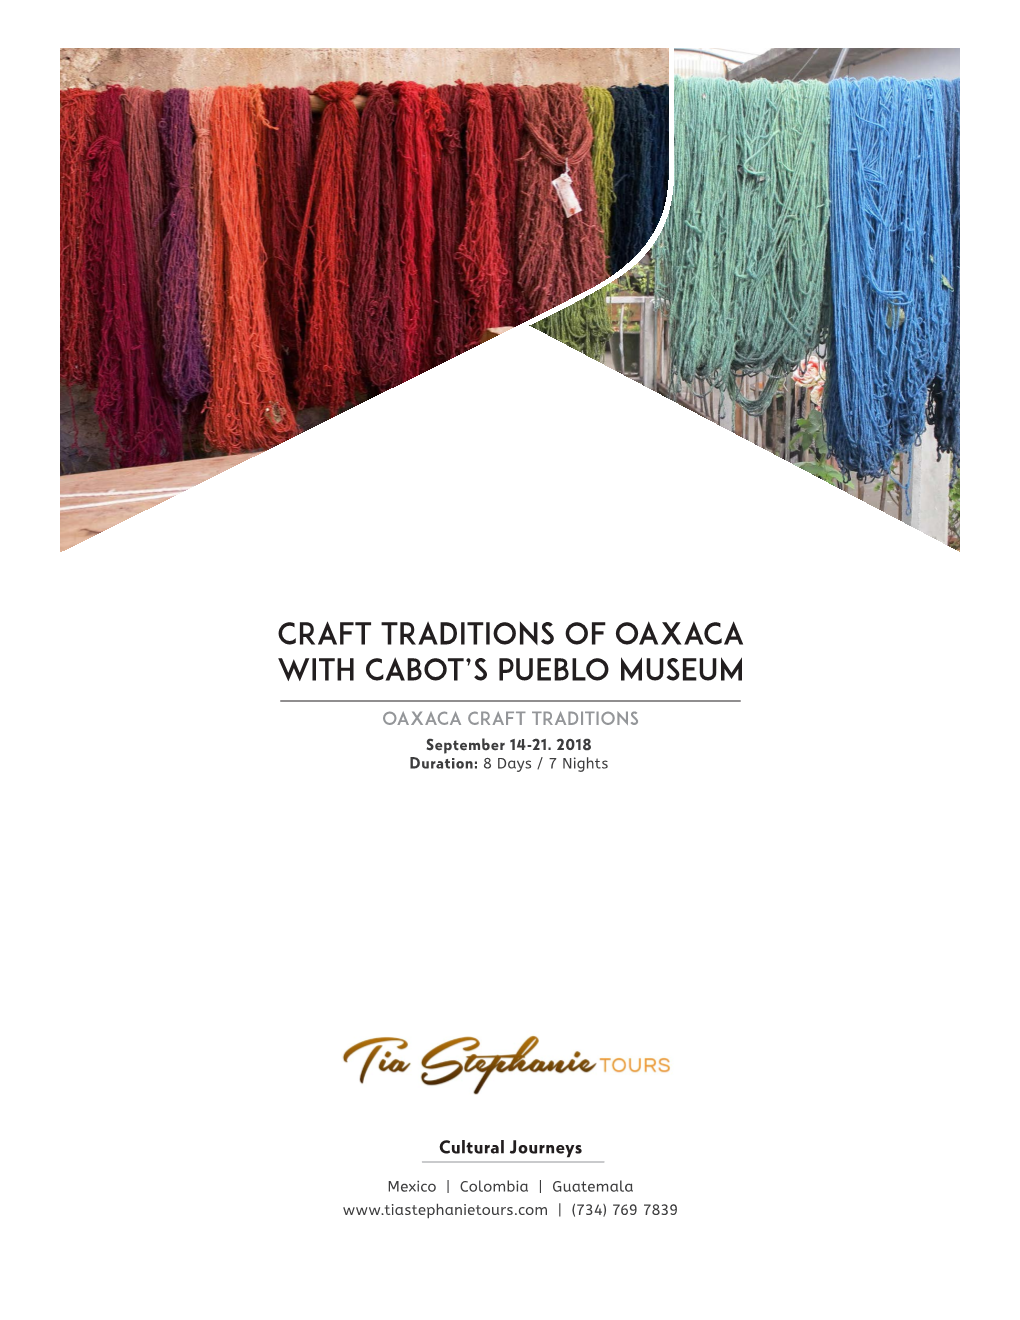 Craft Traditions of Oaxaca with Cabot's Pueblo Museum